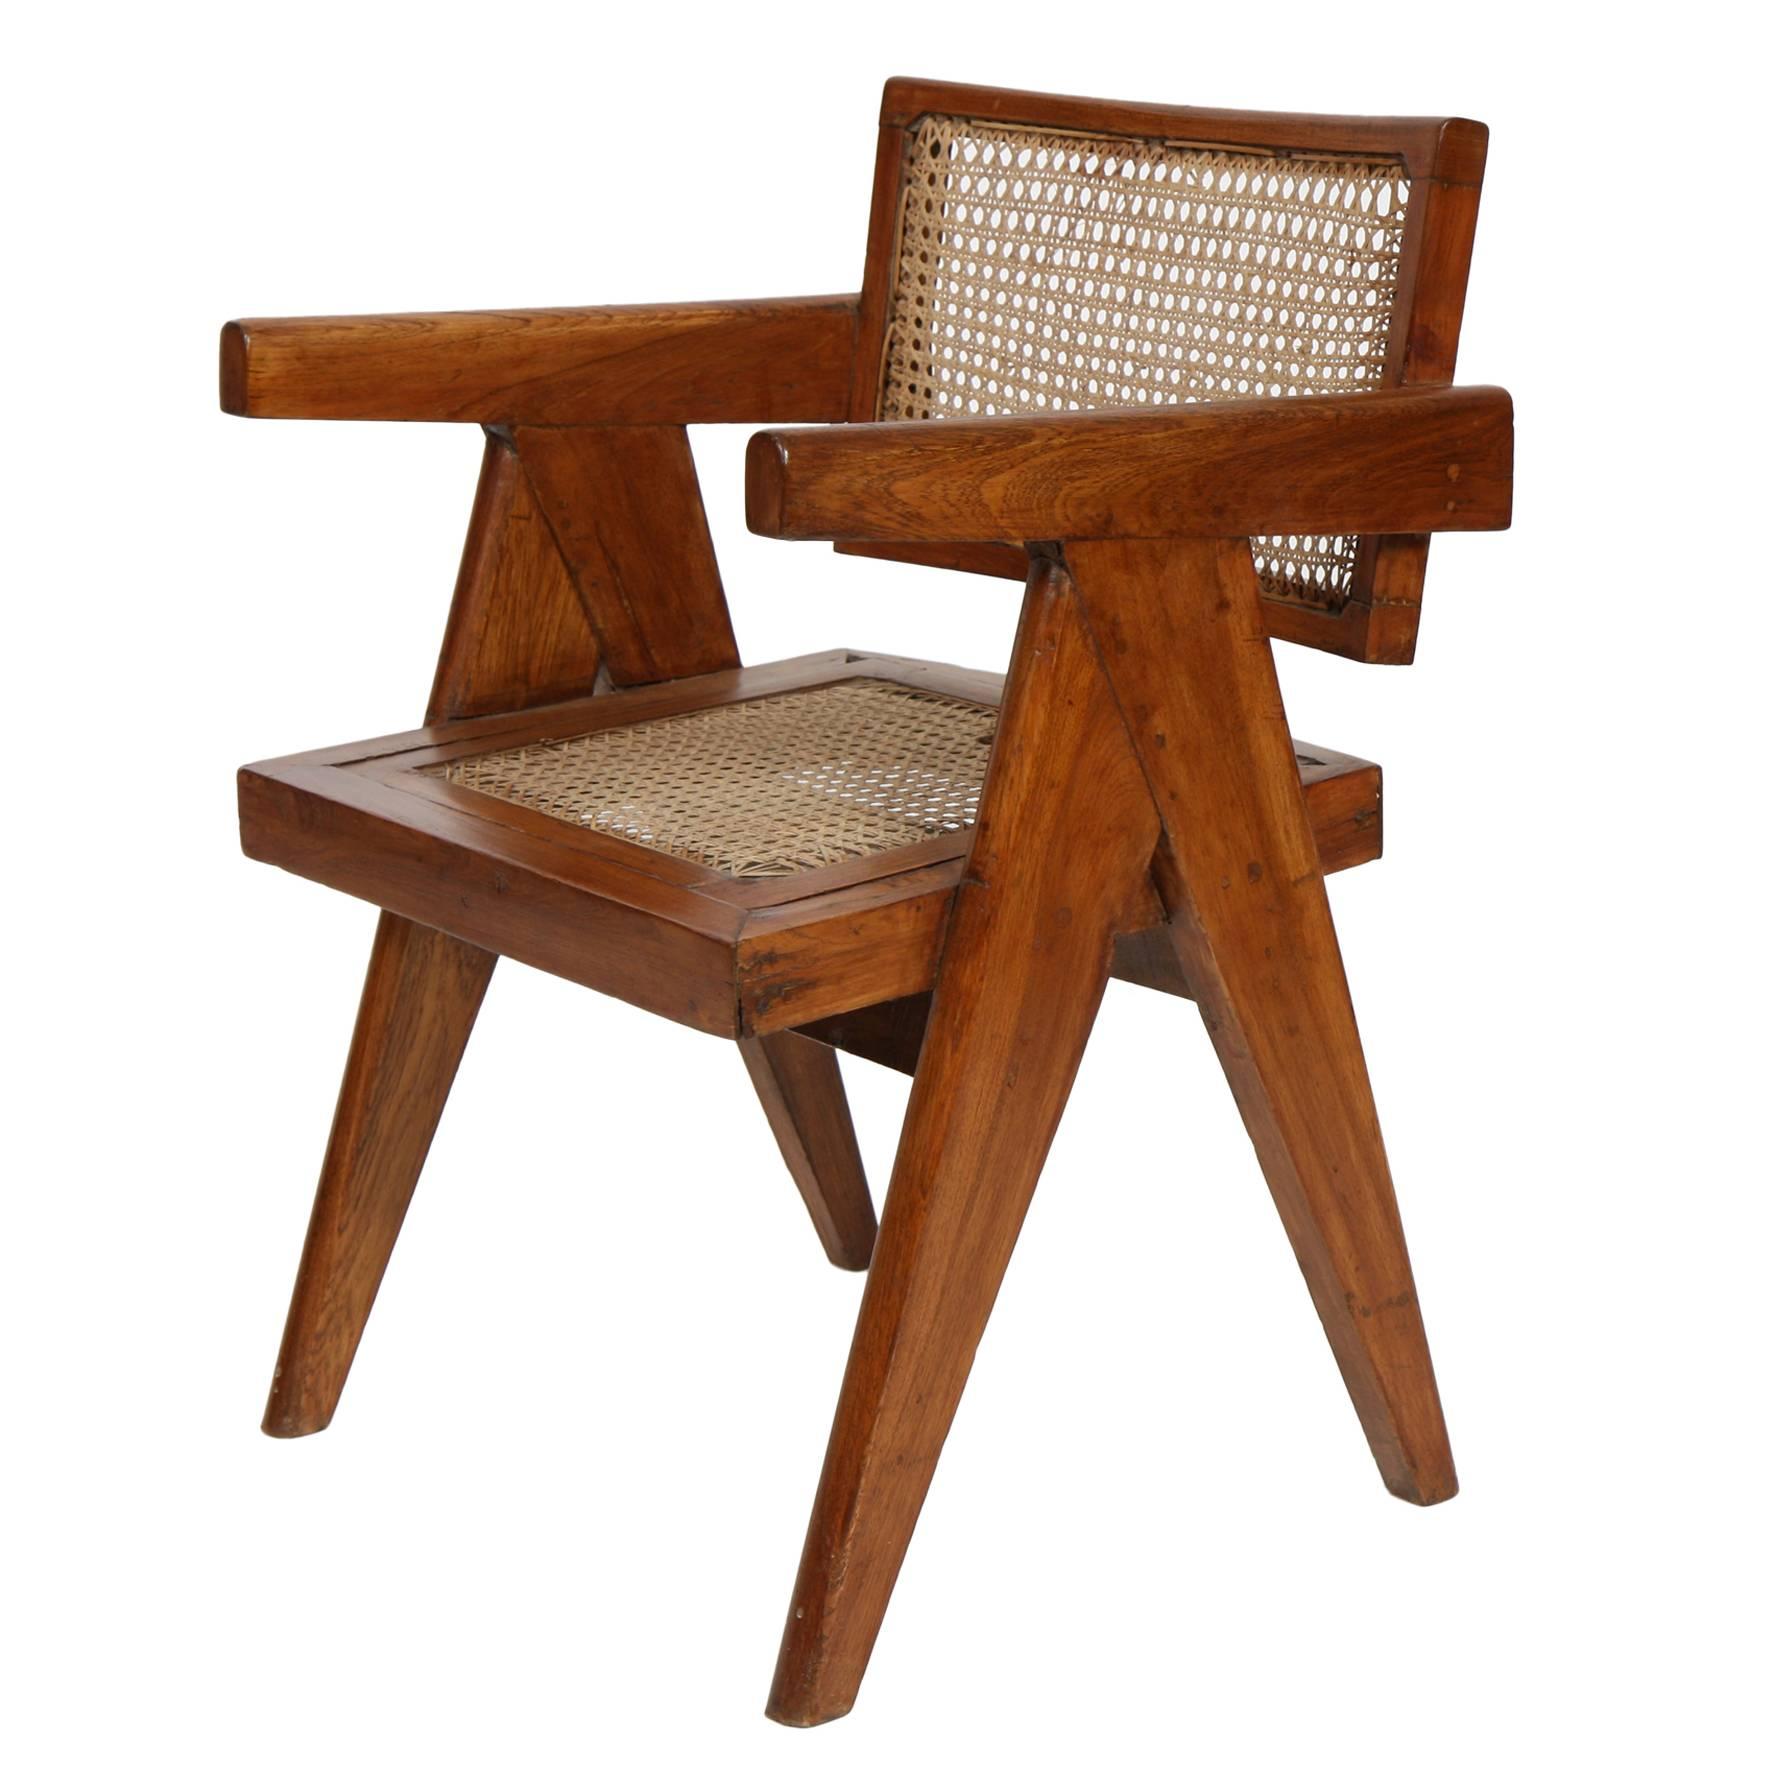 Pierre Jeanneret "Office Cane Elegant Chairs"